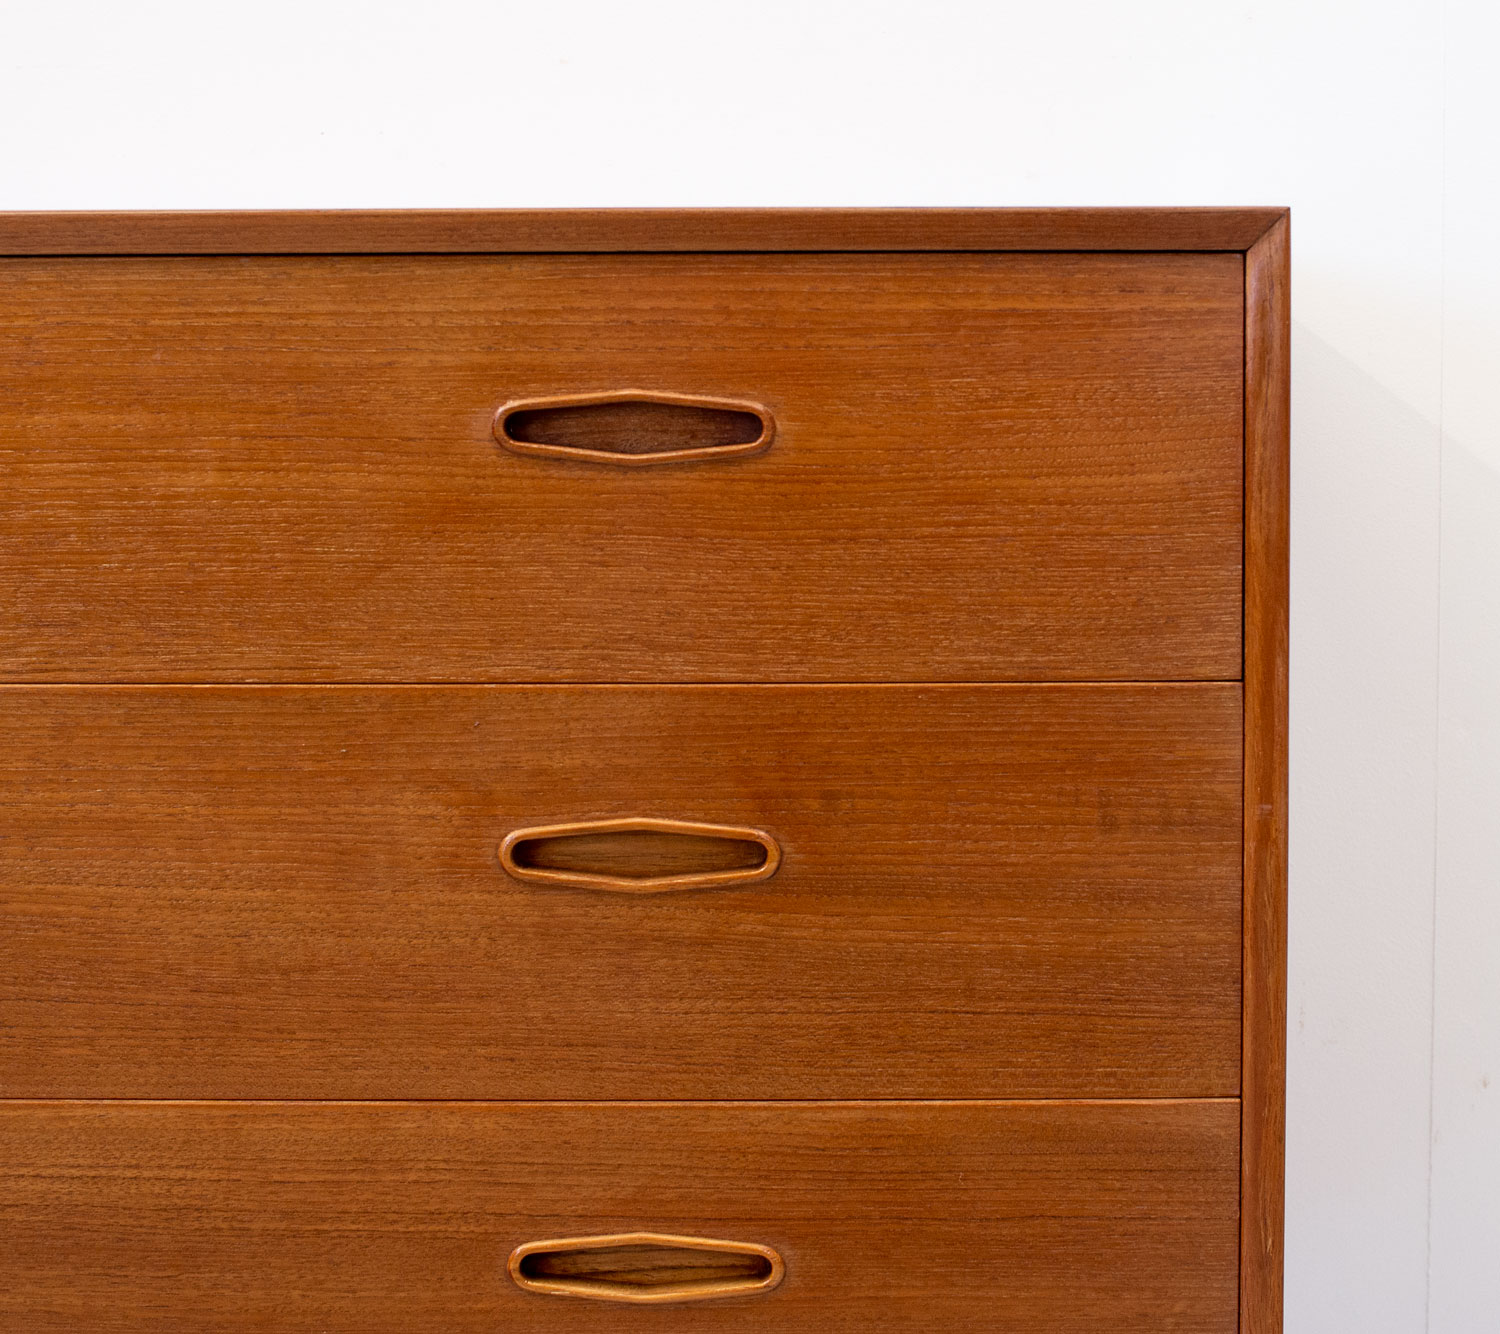 Domi Teak Chest of Drawers by Nils Jonsson for Hugo Troeds